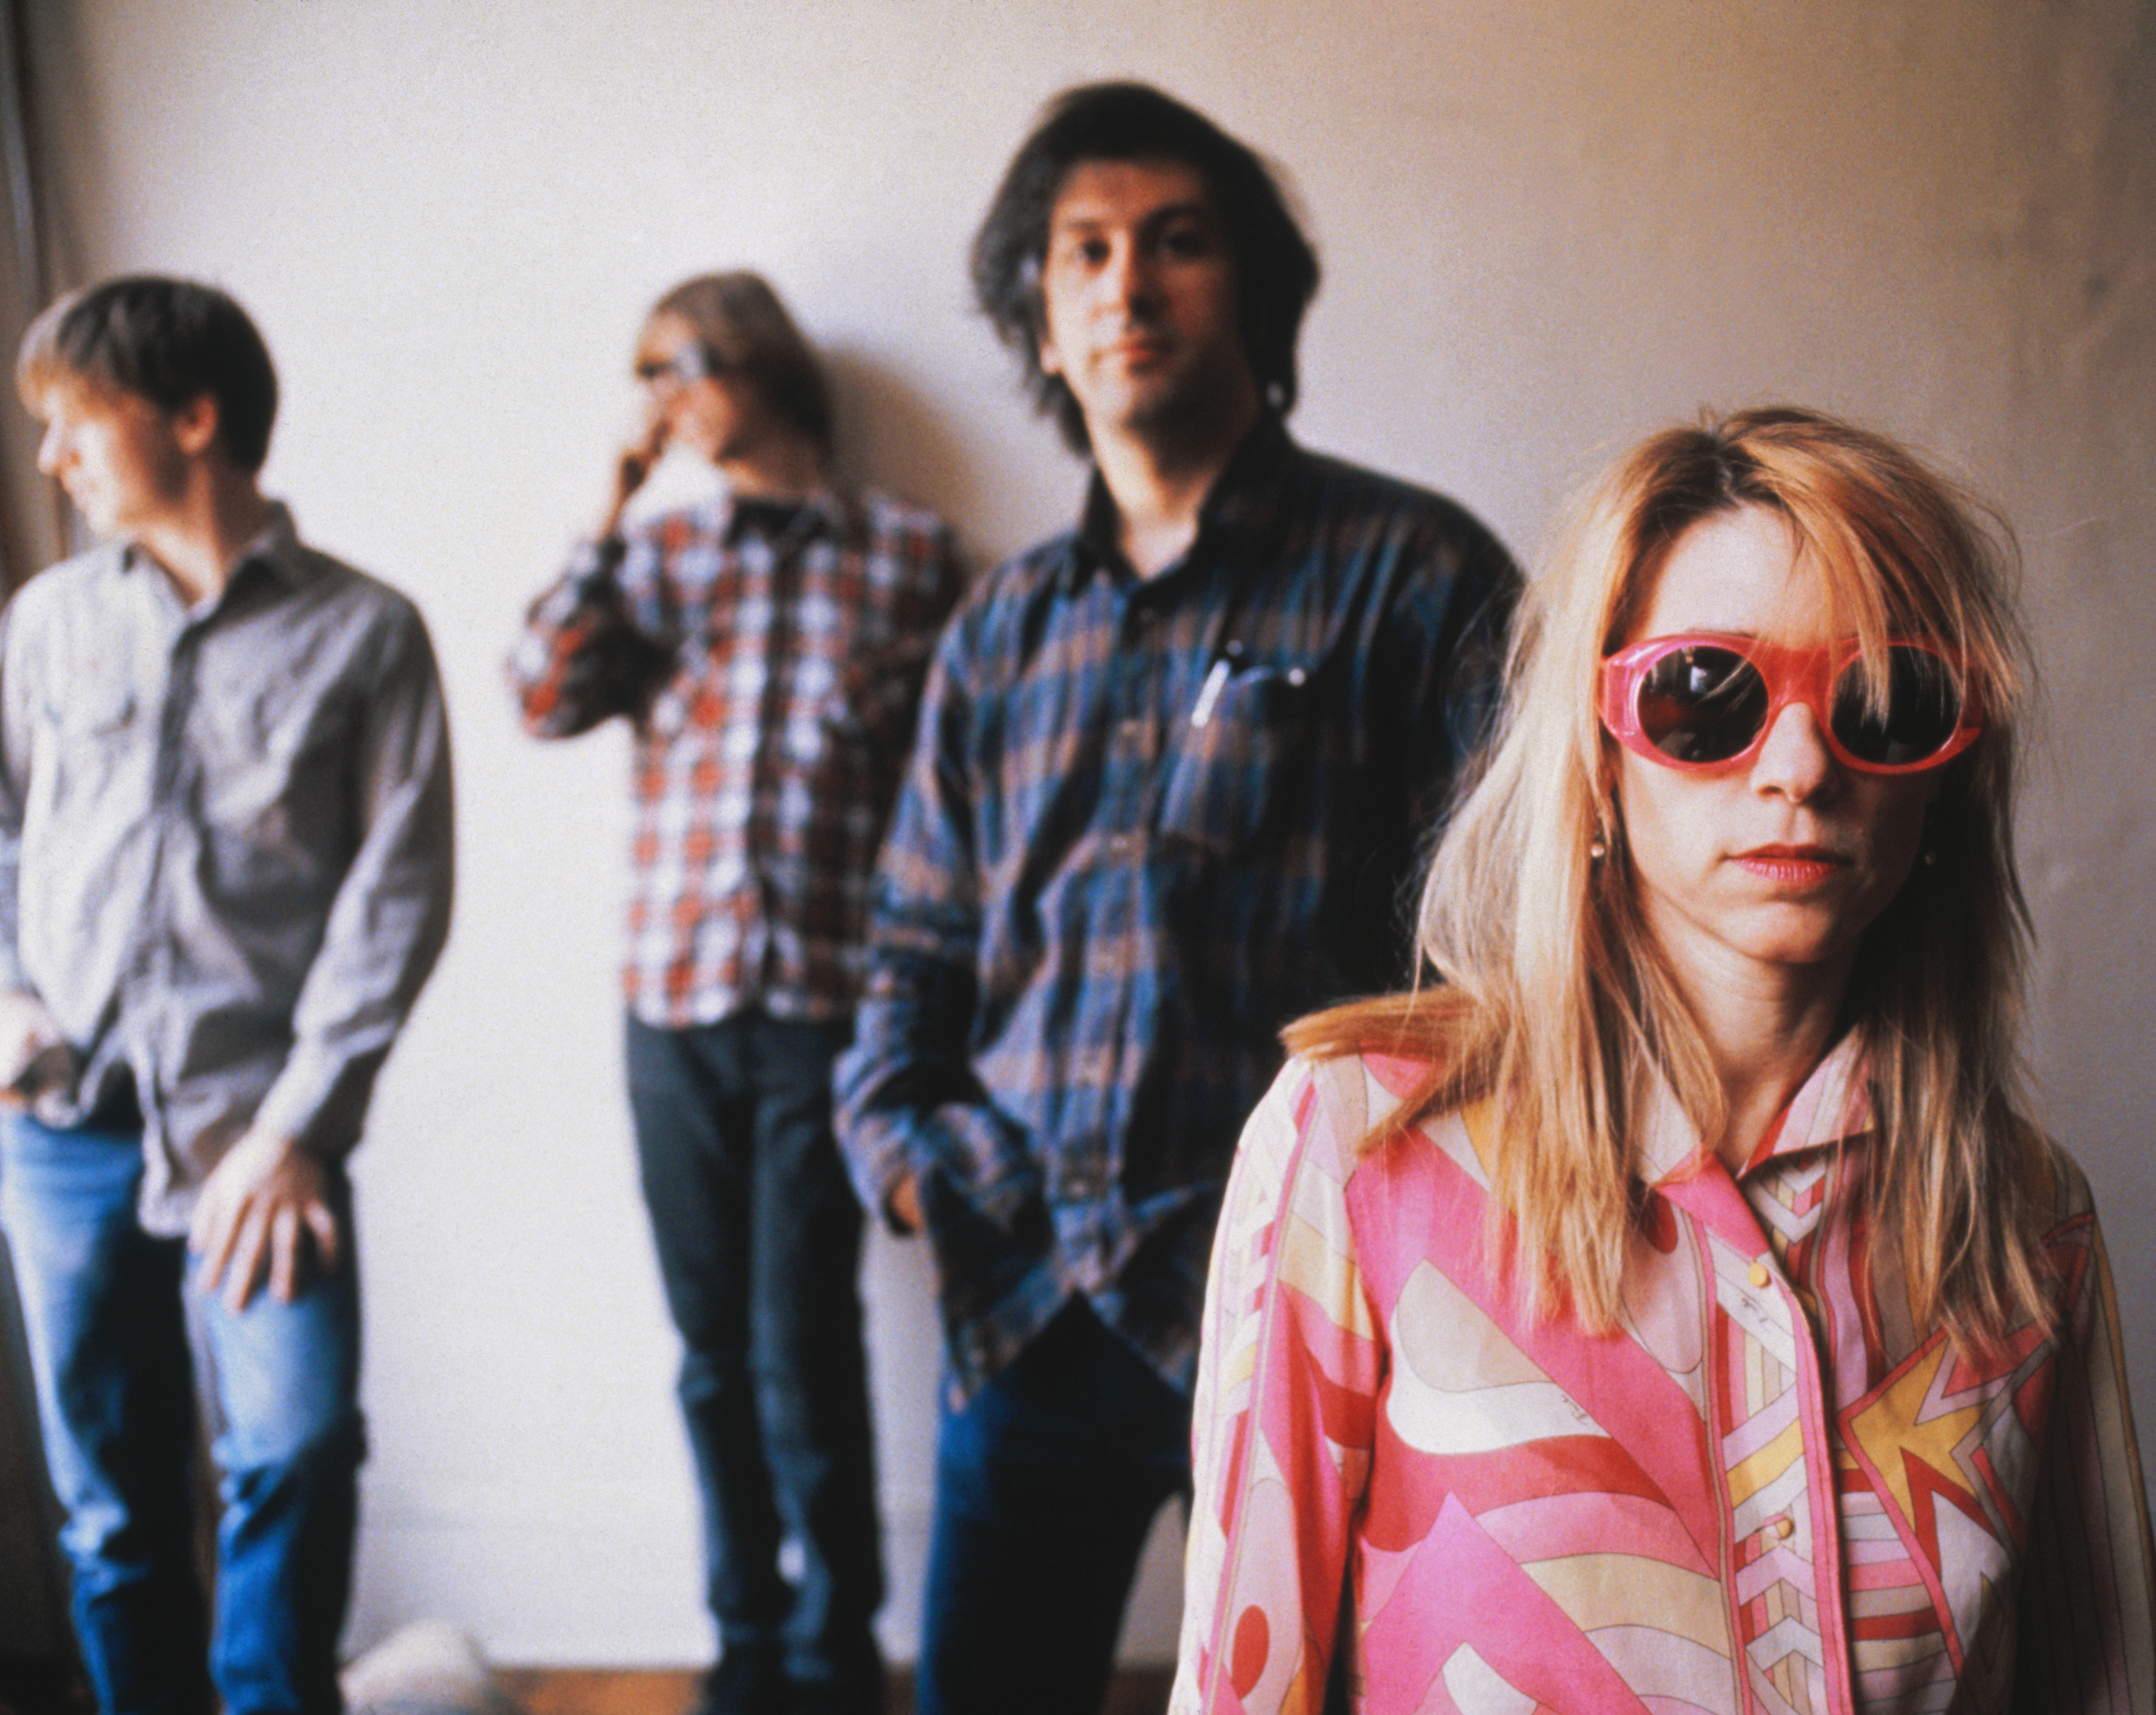 Don't Give Me Your Soul: The Oral History of Sonic Youth's <i>
<p><strong>THE STUDIO</strong></p>
<p><strong>Moore:</strong> God only knows what <em>Goo</em> would have sounded like if we did it in Wharton Tiers’ basement. That’s where we did <em>Confusion Is Sex</em> and <em>Kill Yr Idols</em>; maybe <em>Goo</em> would have come out the same way. All I know is that we did some demos for <em>Goo</em> that were more like eight-track demos, and there’s aspects of those that I find more interesting than what happens coming out of a 24-track board. I really liked the energy on those demos, because it sounded like the 24-track kind of spread things out a bit and it’s slightly more dissipating. It’s a learning process, the technology of it all. We were never a studio band in the sense of Pink Floyd or Steely Dan, where they were really utilizing every inch of it. We came to do that when we had our own studio, Echo Canyon, later on in the ’90s.</p>
<p><strong>Kim Gordon:</strong> We were excited. That was our first getting-out-of-the-basement-type recording situation. I mean, we did record at Sear Sound. But Sear Sound at the time was pretty lo-fi. But in a great way.</p>
<p><strong>Ranaldo:</strong> It was our first major-label record; we were second-guessing ourselves, like, is this mix good enough? This is pretty easy to do in the studio. And I’ve seen this happen to other bands from our scene that graduated to a major and got freaked out a little bit about making their first record. We weren’t sure the mixes with Nick Sansano were what we wanted, so we stopped working with him after a couple of sessions. We were desperate to try and finish this record, so the label brought in Ron St. Germain and we kind of referred to him as a console cowboy. He was a pilot at one point, I think, so he was really into all the tech stuff. And he did a really good job mixing it, though it was probably not mixed exactly the way we would have on our own.</p>
<p><strong>Moore:</strong> I remember the engineer telling us that we would be using the B-room, because Public Enemy were going to be doing their new sessions in the other room. When we found that out, we were like, ‘Where do we sign?’ This was the perfect situation because I was so huge into <em>It Takes a Nation of Millions to Hold Us Back</em>. When we started recording there, I had everybody involved with that record in the studio at the time, so I have the CD that has like 40 signatures on it with the entire crew of PE somewhere. Ice Cube had come by for one day and was hanging out right when N.W.A was hitting and he had to be in New York. I remember Chuck D calling him ‘Cubism’ and things like that.</p>
<p><strong>Shelley:</strong> We were recording at Greene Street Studios at the same time as Public Enemy, and Kim invited Chuck to say something on the middle eight of “Kool Thing.” But we would also spend time with Eric ‘Vietnam’ Sadler from the Bomb Squad, and he was really interested in what we were doing. Sometimes Flavor Flav would come by and sit with us for a bit and talk. But Eric seemed to be the most curious about what this band was doing with all these noisy guitars and everything.</p>
<p><strong>Moore:</strong> Vietnam would always pop in and see what we were up to. He was the one who asked Chuck about being on “Kool Thing,” and within minutes, Chuck just rambled in. We asked him if he wanted to hear the song first, but he was like, ‘Nah, that’s alright, I’ll just put on the headphones and just run it.’ It was super, man, he did it in just one take. He listened, heard Kim’s recitation in the middle and he just flowed with it freestyle and then boom, that was it. <strong><br />
</strong></p>
<p><strong>Gordon:</strong> Hip-hop was a really big part of downtown music in a way. It was a place where so many things would collide, whether it was like the tradition of jazz in New York City, and then hip-hop coming from uptown to downtown and then all the new classical music from like La Monte Young and Rhys Chatham. It was all kind of melding together. It felt like walking down a street in New York, just this constant bombardment of sounds.</p>
<img src=